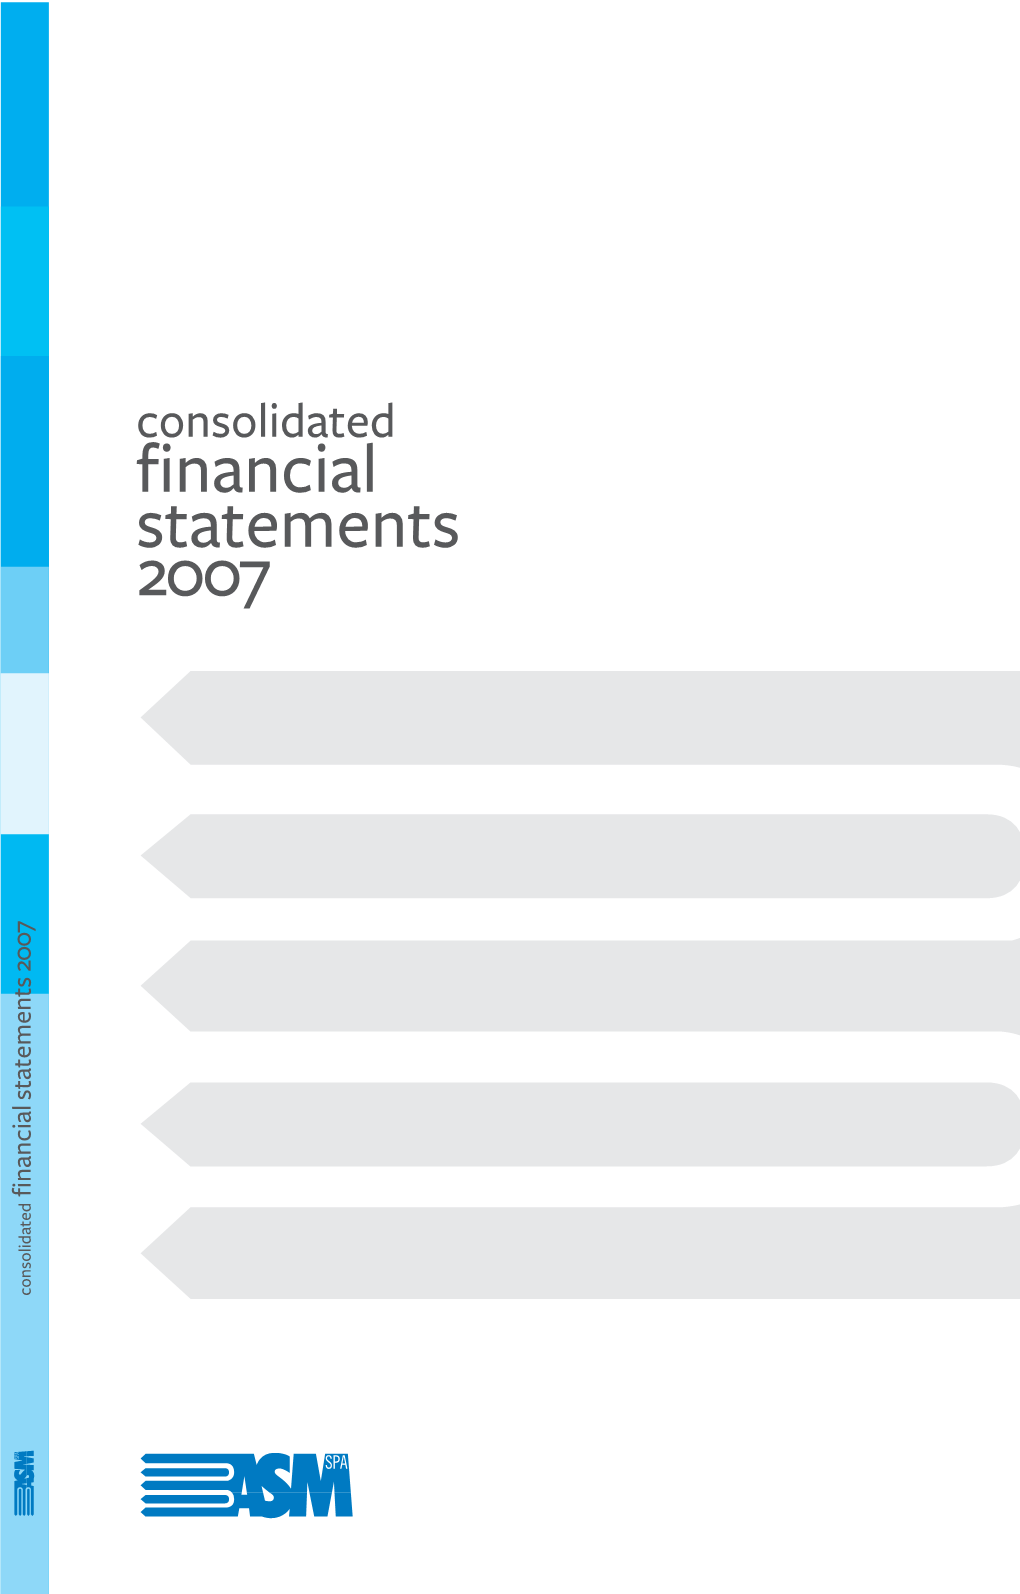 Financial Statements 2007 Financial Statements 2007 Consolidated Consolidated